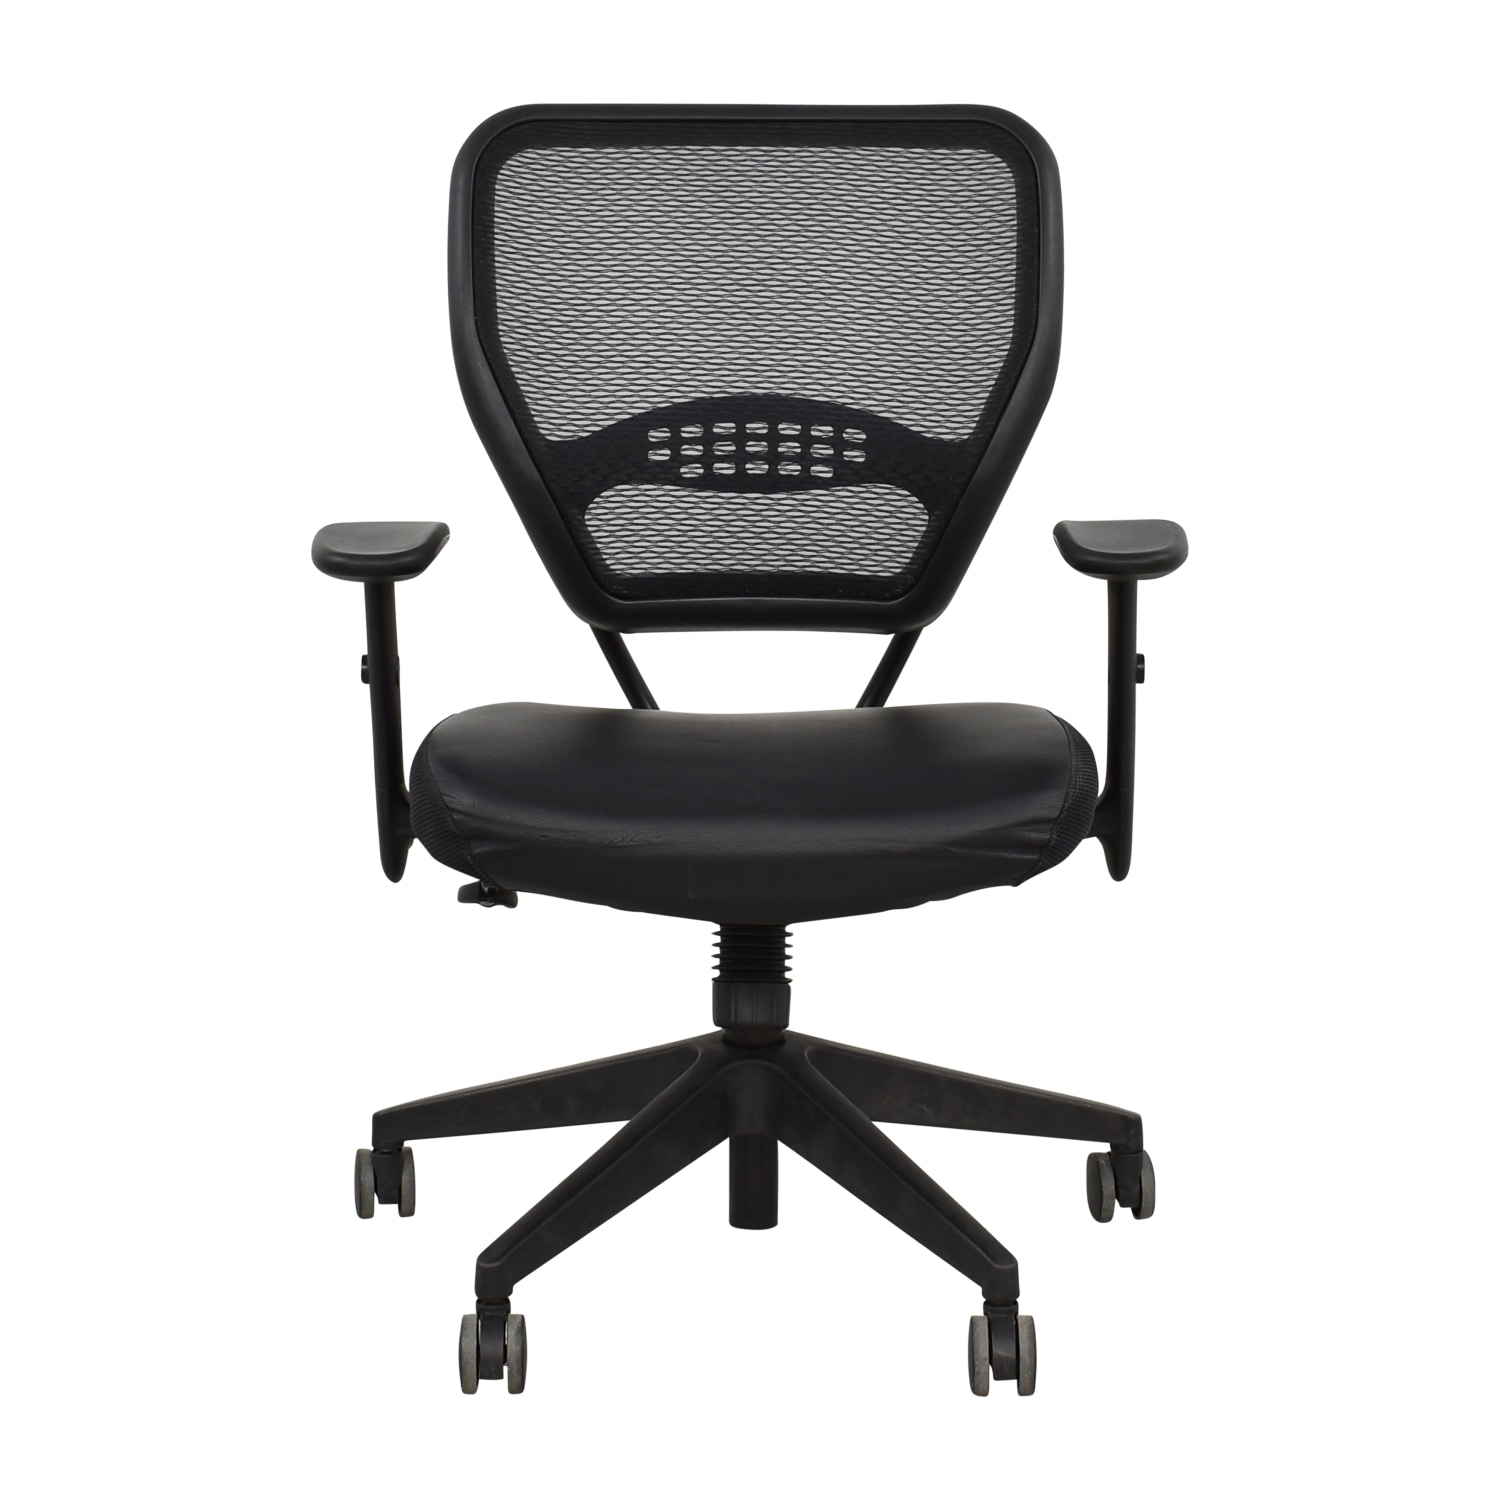 https://res.cloudinary.com/dkqtxtobb/image/upload/f_auto,q_auto:best,w_1500/product-assets/237070/office-star/chairs/accent-chairs/shop-office-star-managers-chair.jpeg